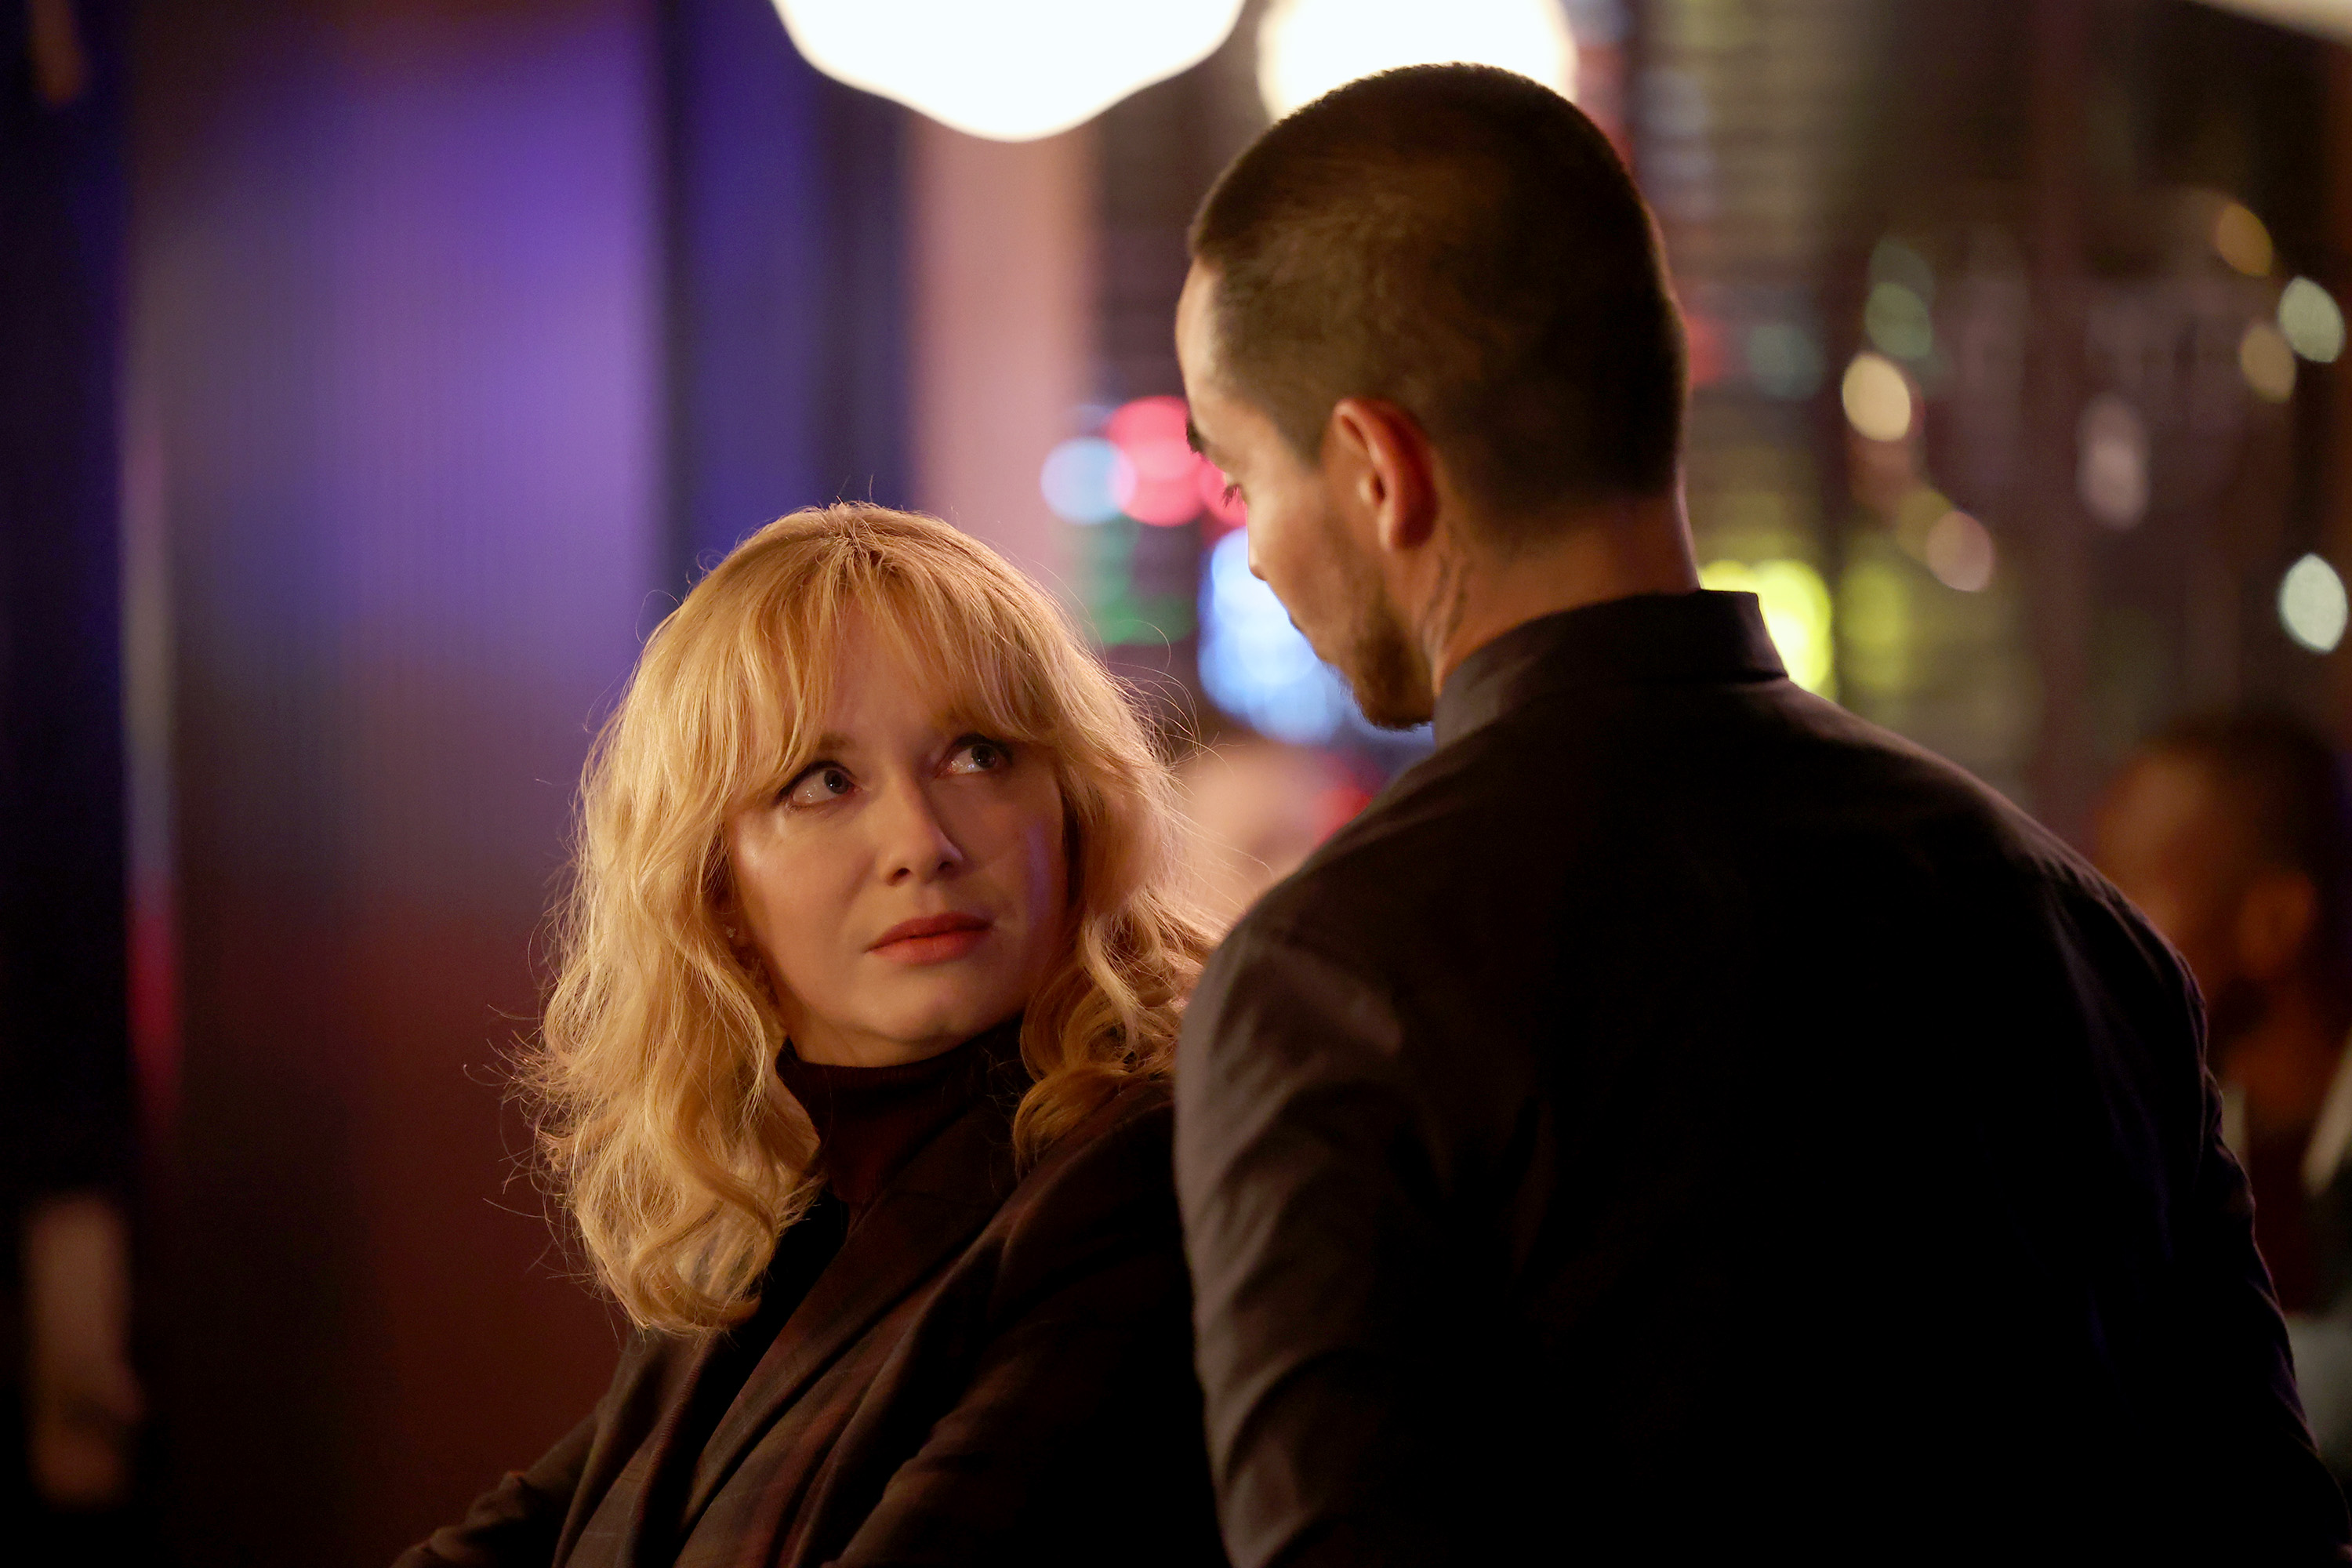 'Good Girls' stars Christina Hendricks and Manny Montana staring intensely at each other as Beth and Rio.